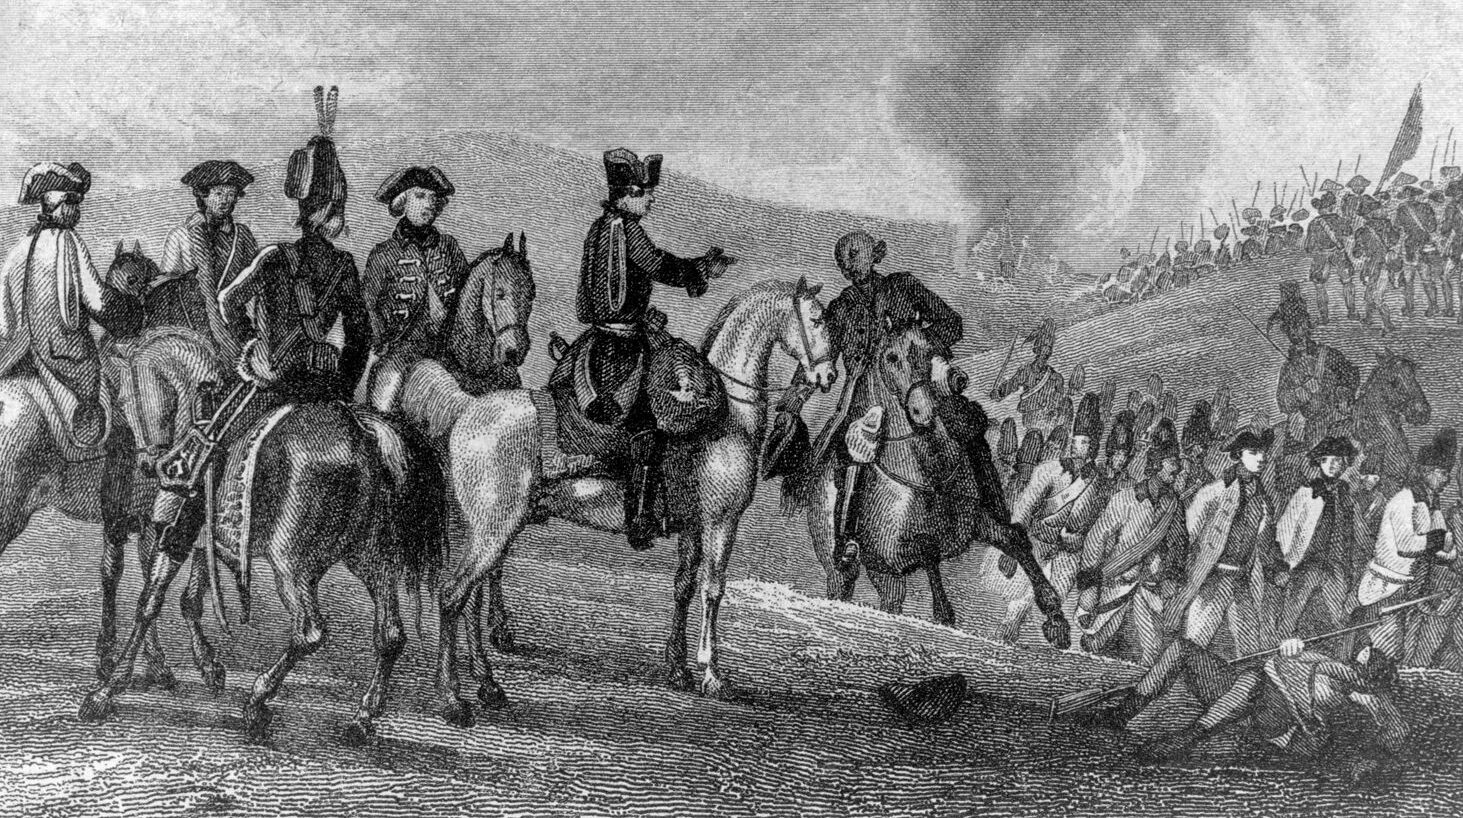 Frederick the Great directs his troops at the Battle of Lobositz, northern Bohemia, where he began the Seven Years’ War in 1756. 